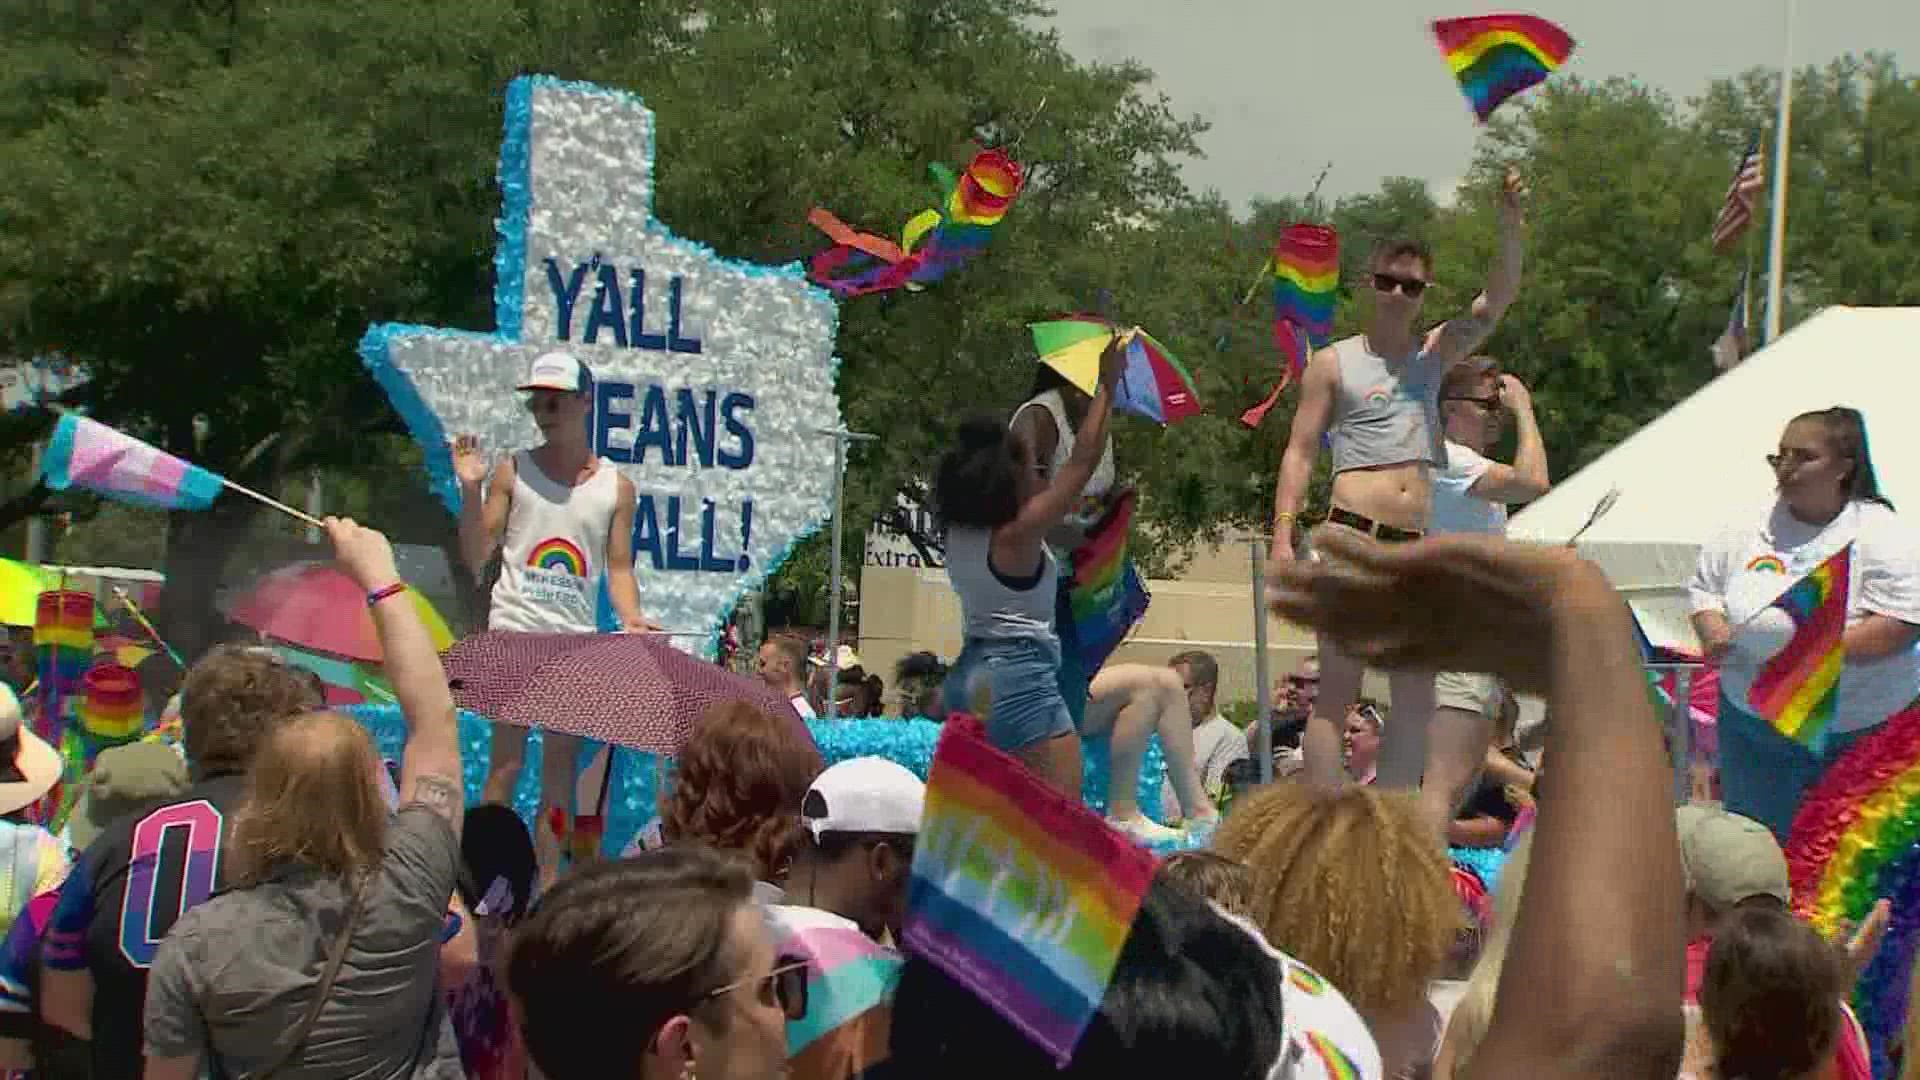 The Dallas Pride Parade returned to Fair Park, where a 92-degree June day couldn't dampen the enthusiasm of thousands promising to continue "living out proud."